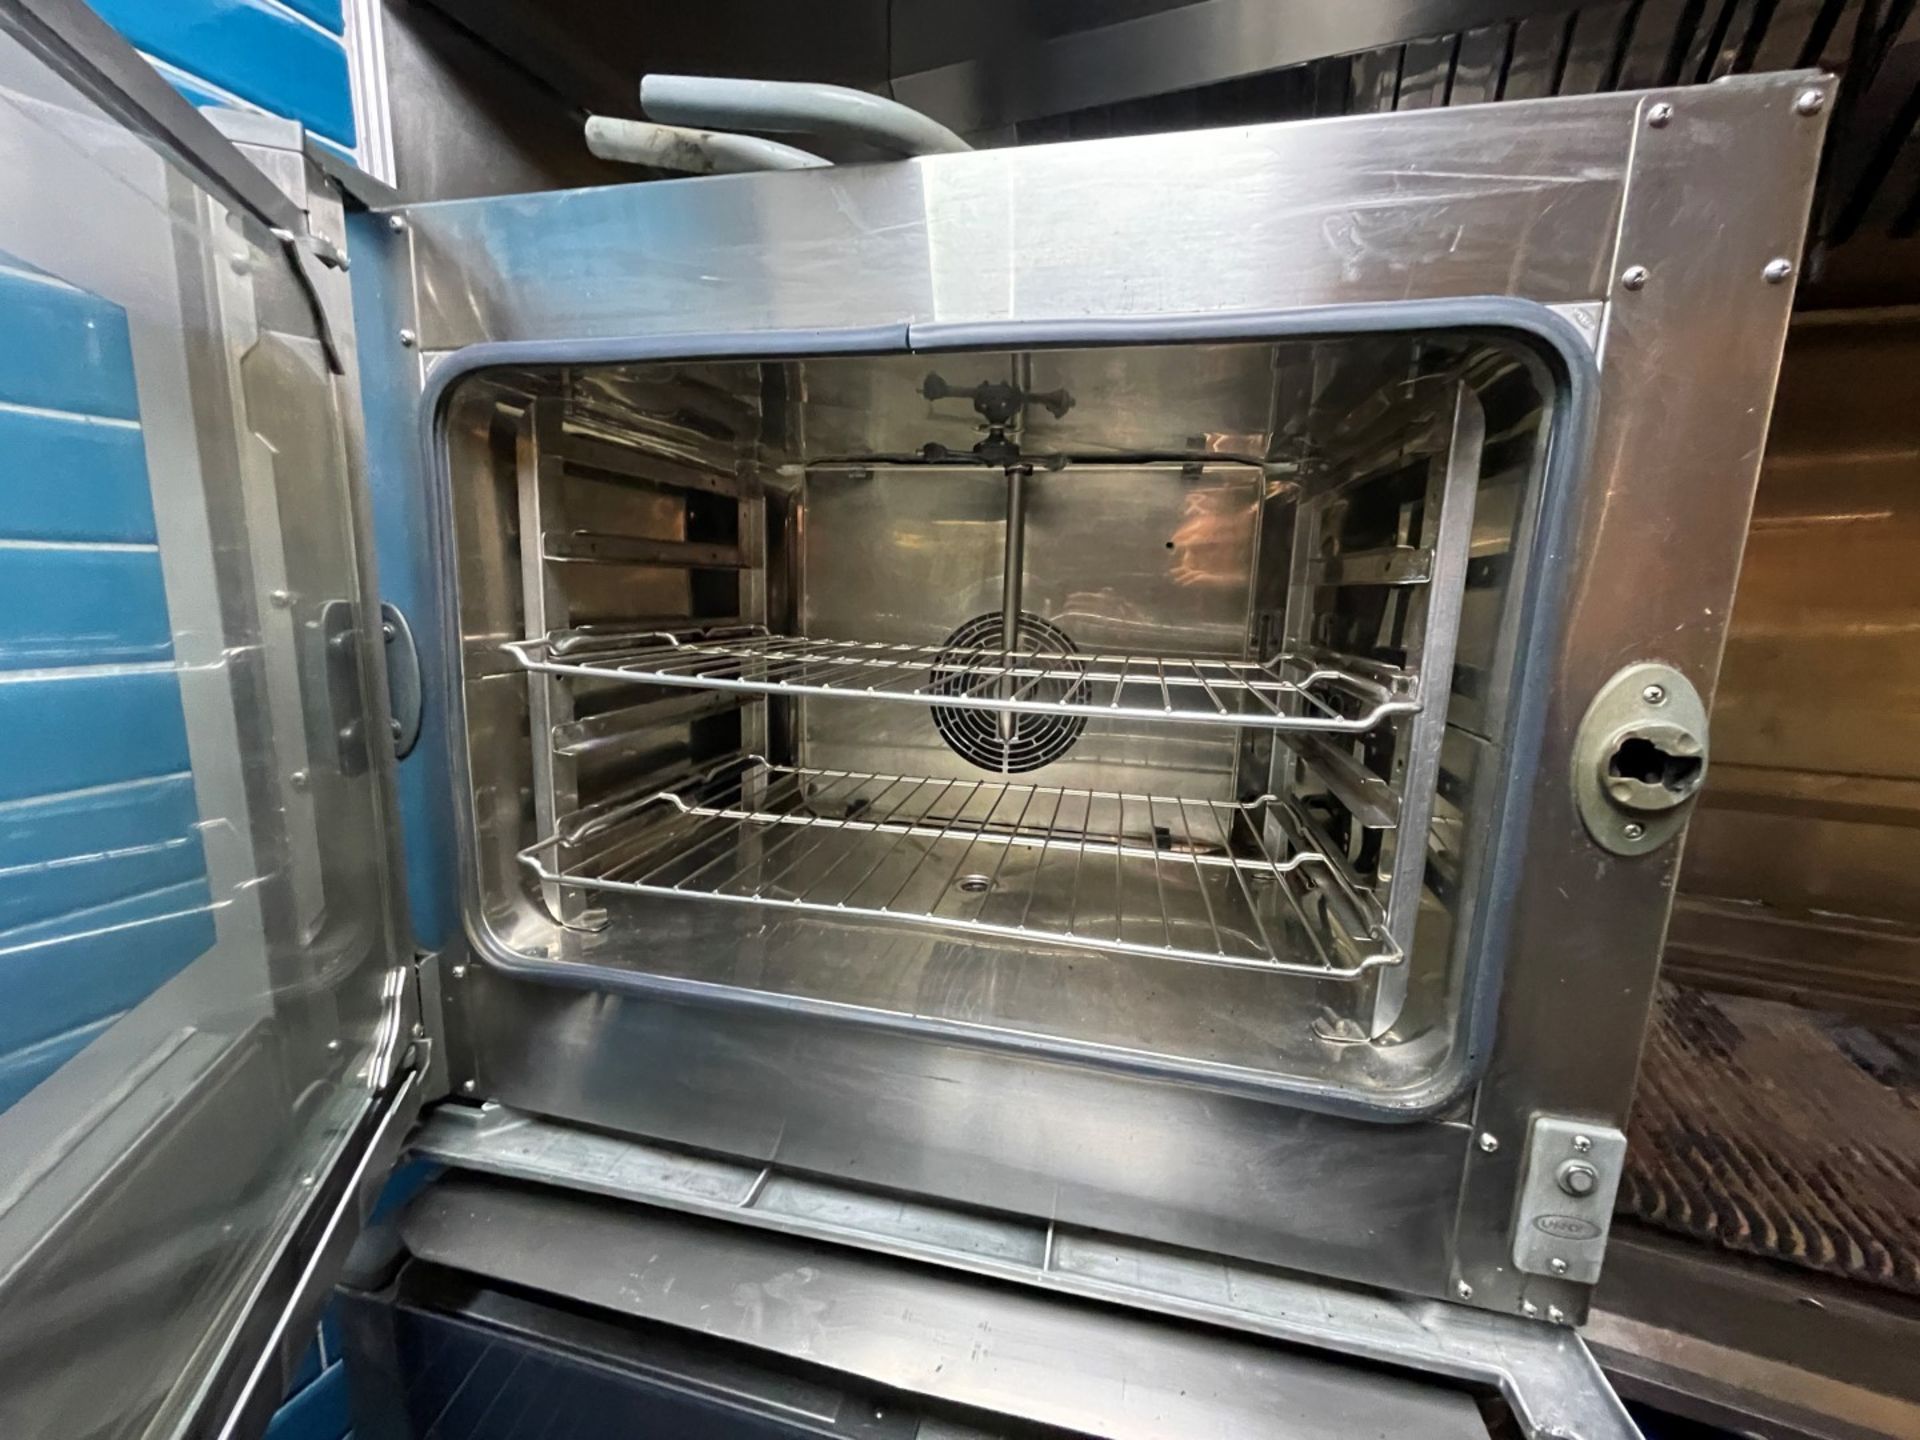 1 x Unox ChefTop XVL385 Commercial 3 Phase Double Oven For Slow Cooking Meats, Proving Dough & More - Image 4 of 26